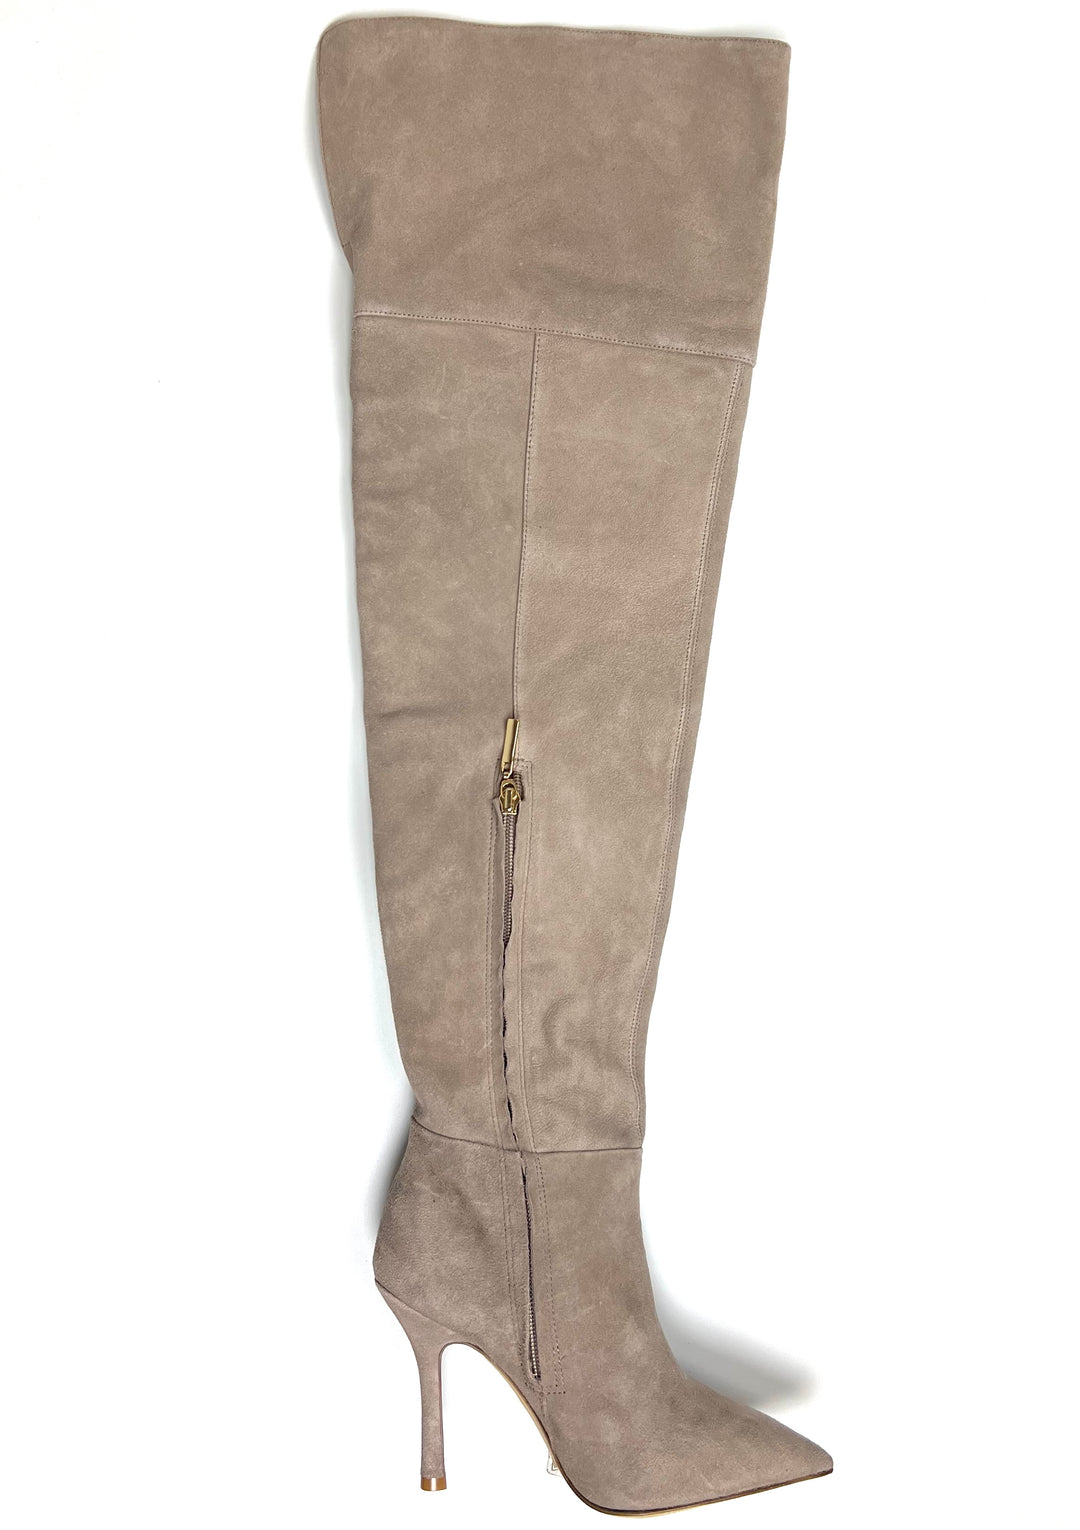 Grey Suede Thigh High Boots - Size 5